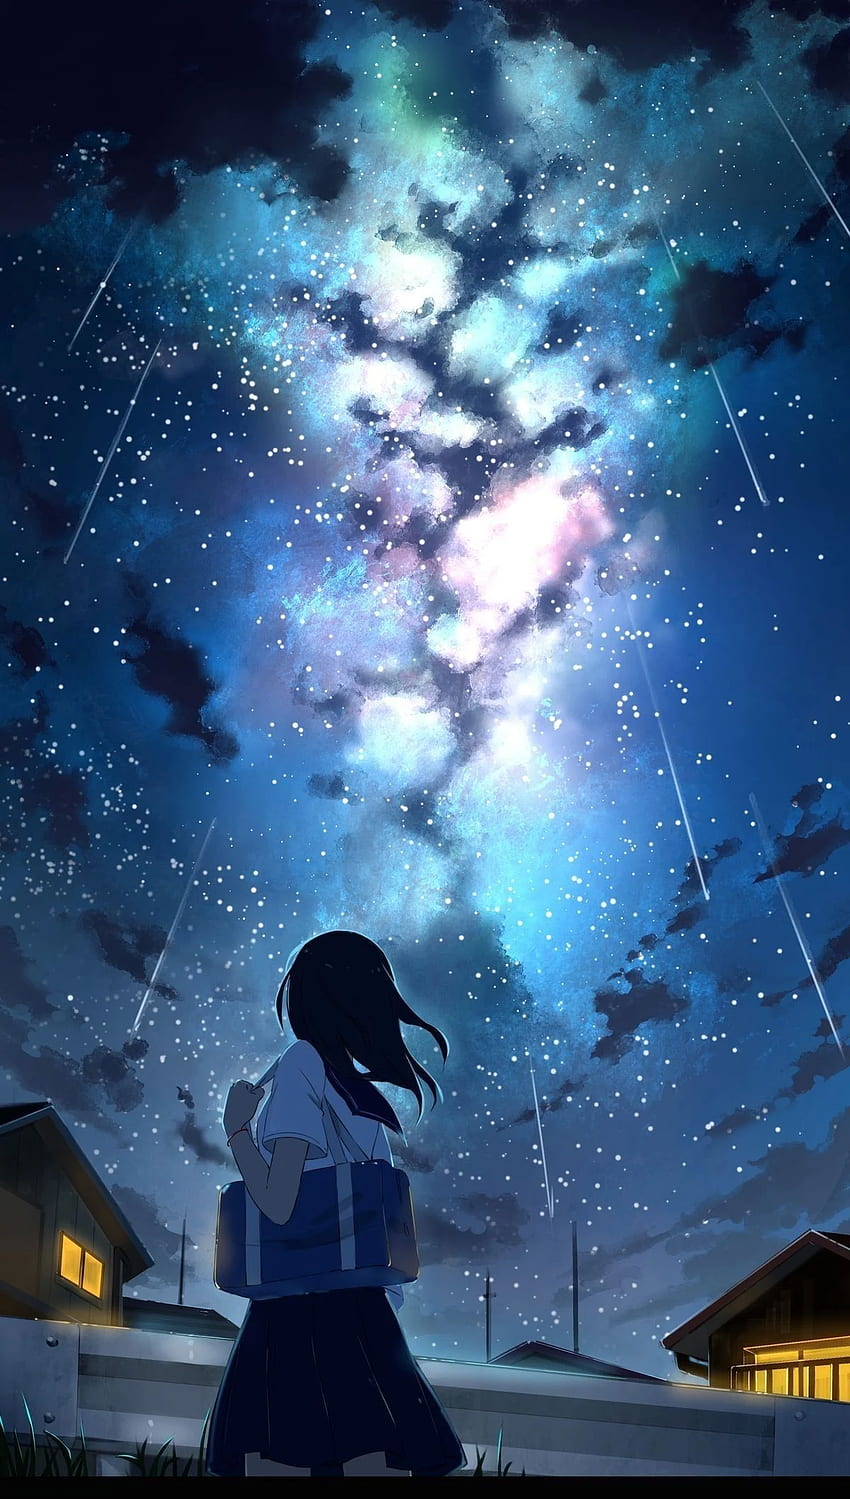 Combine the cuteness of anime girls with the awe-inspiring beauty of galaxies and stars, and you get the perfect HD wallpapers to brighten up your day! Take a look at the stunning collection of \